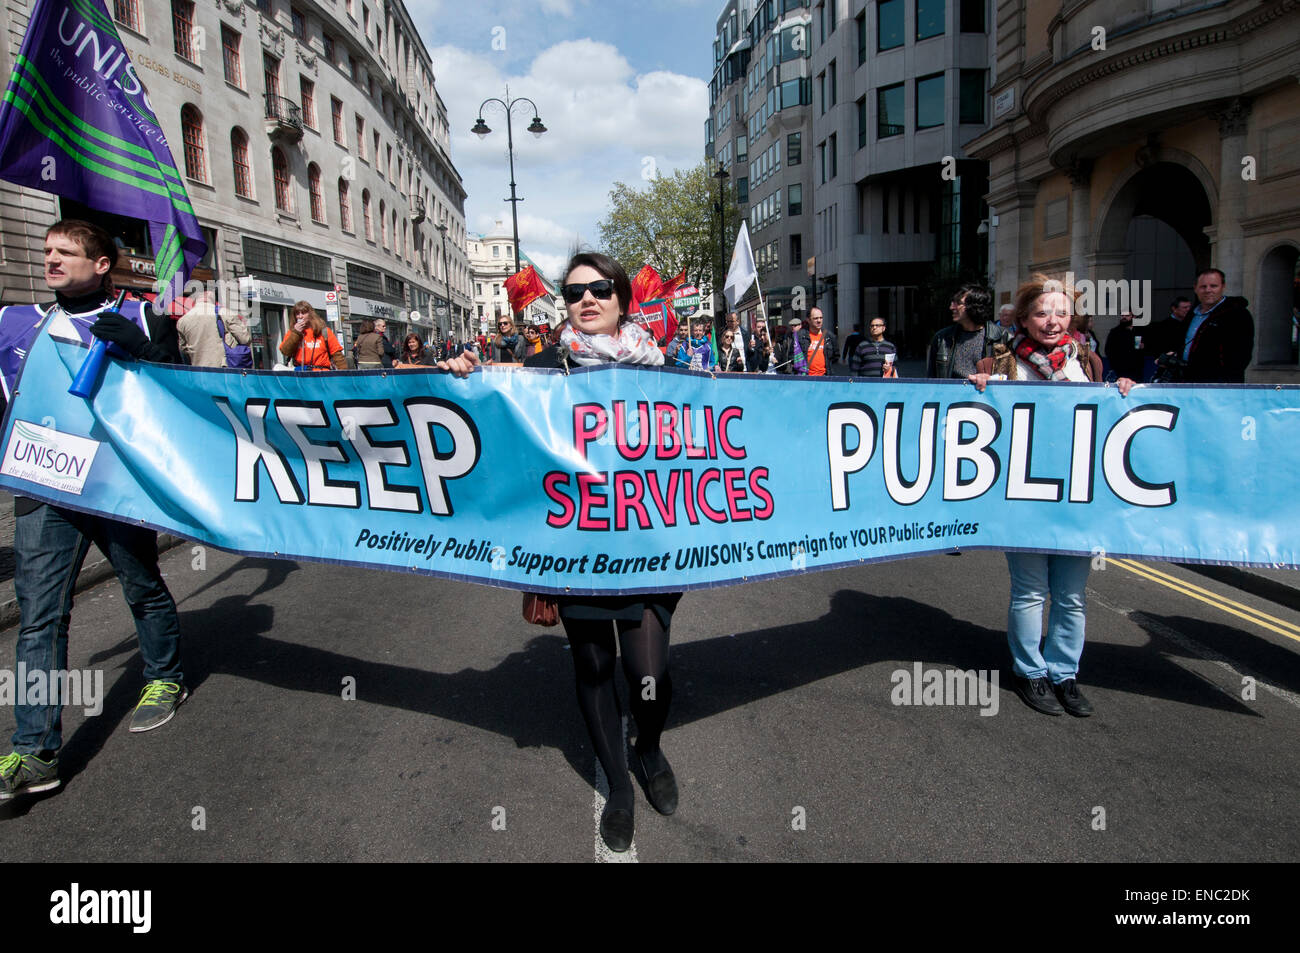 London.Mayday demonstration 2015. Banner saying 'Keep Public Services Public'. Stock Photo